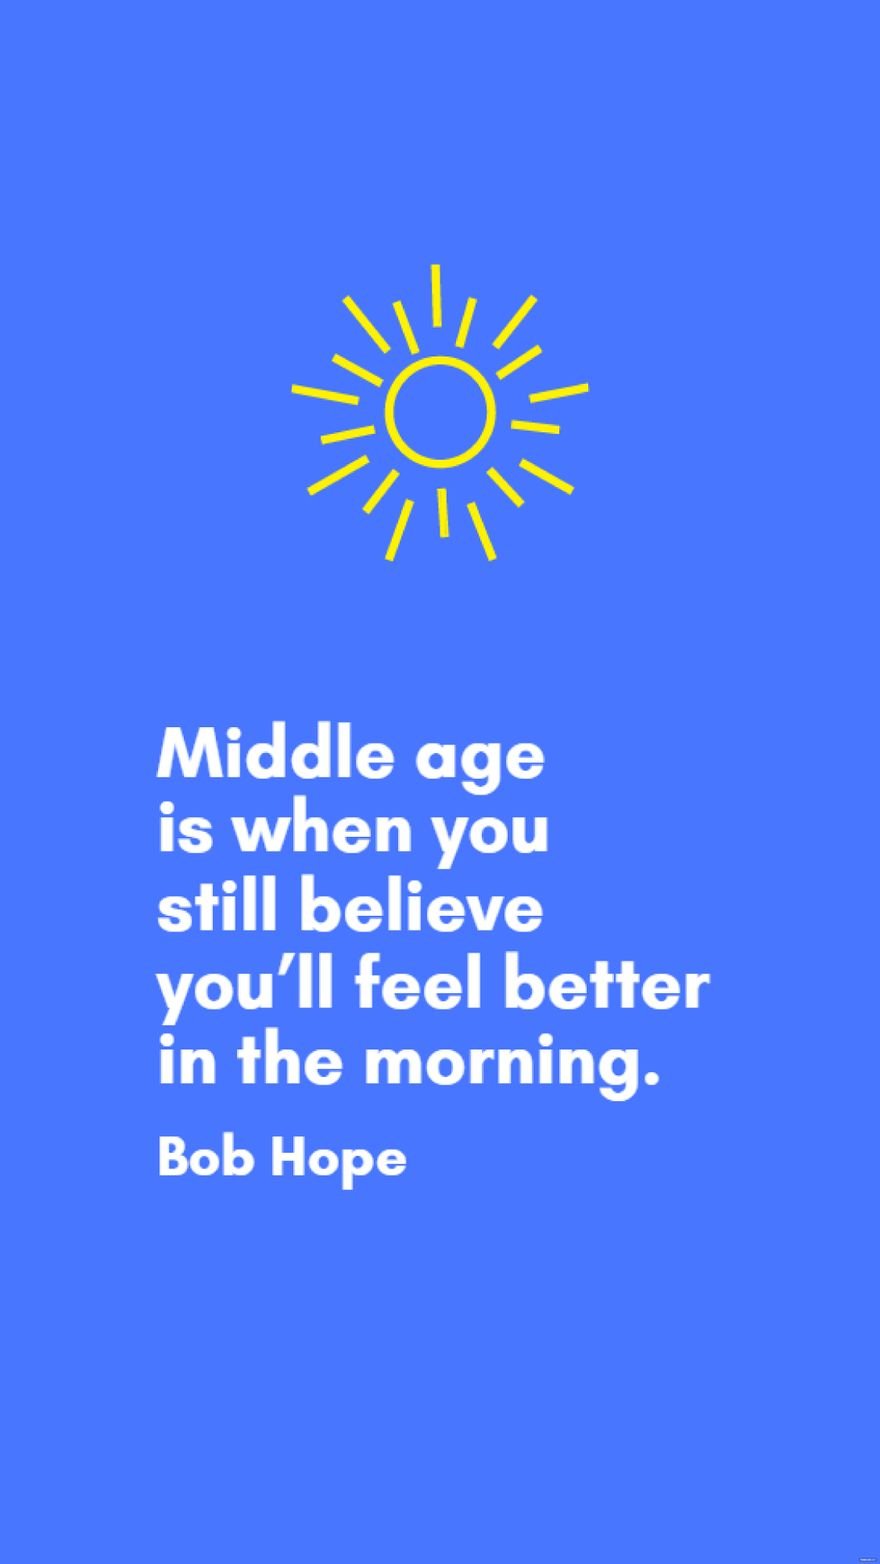 Bob Hope - Middle age is when you still believe you’ll feel better in the morning.